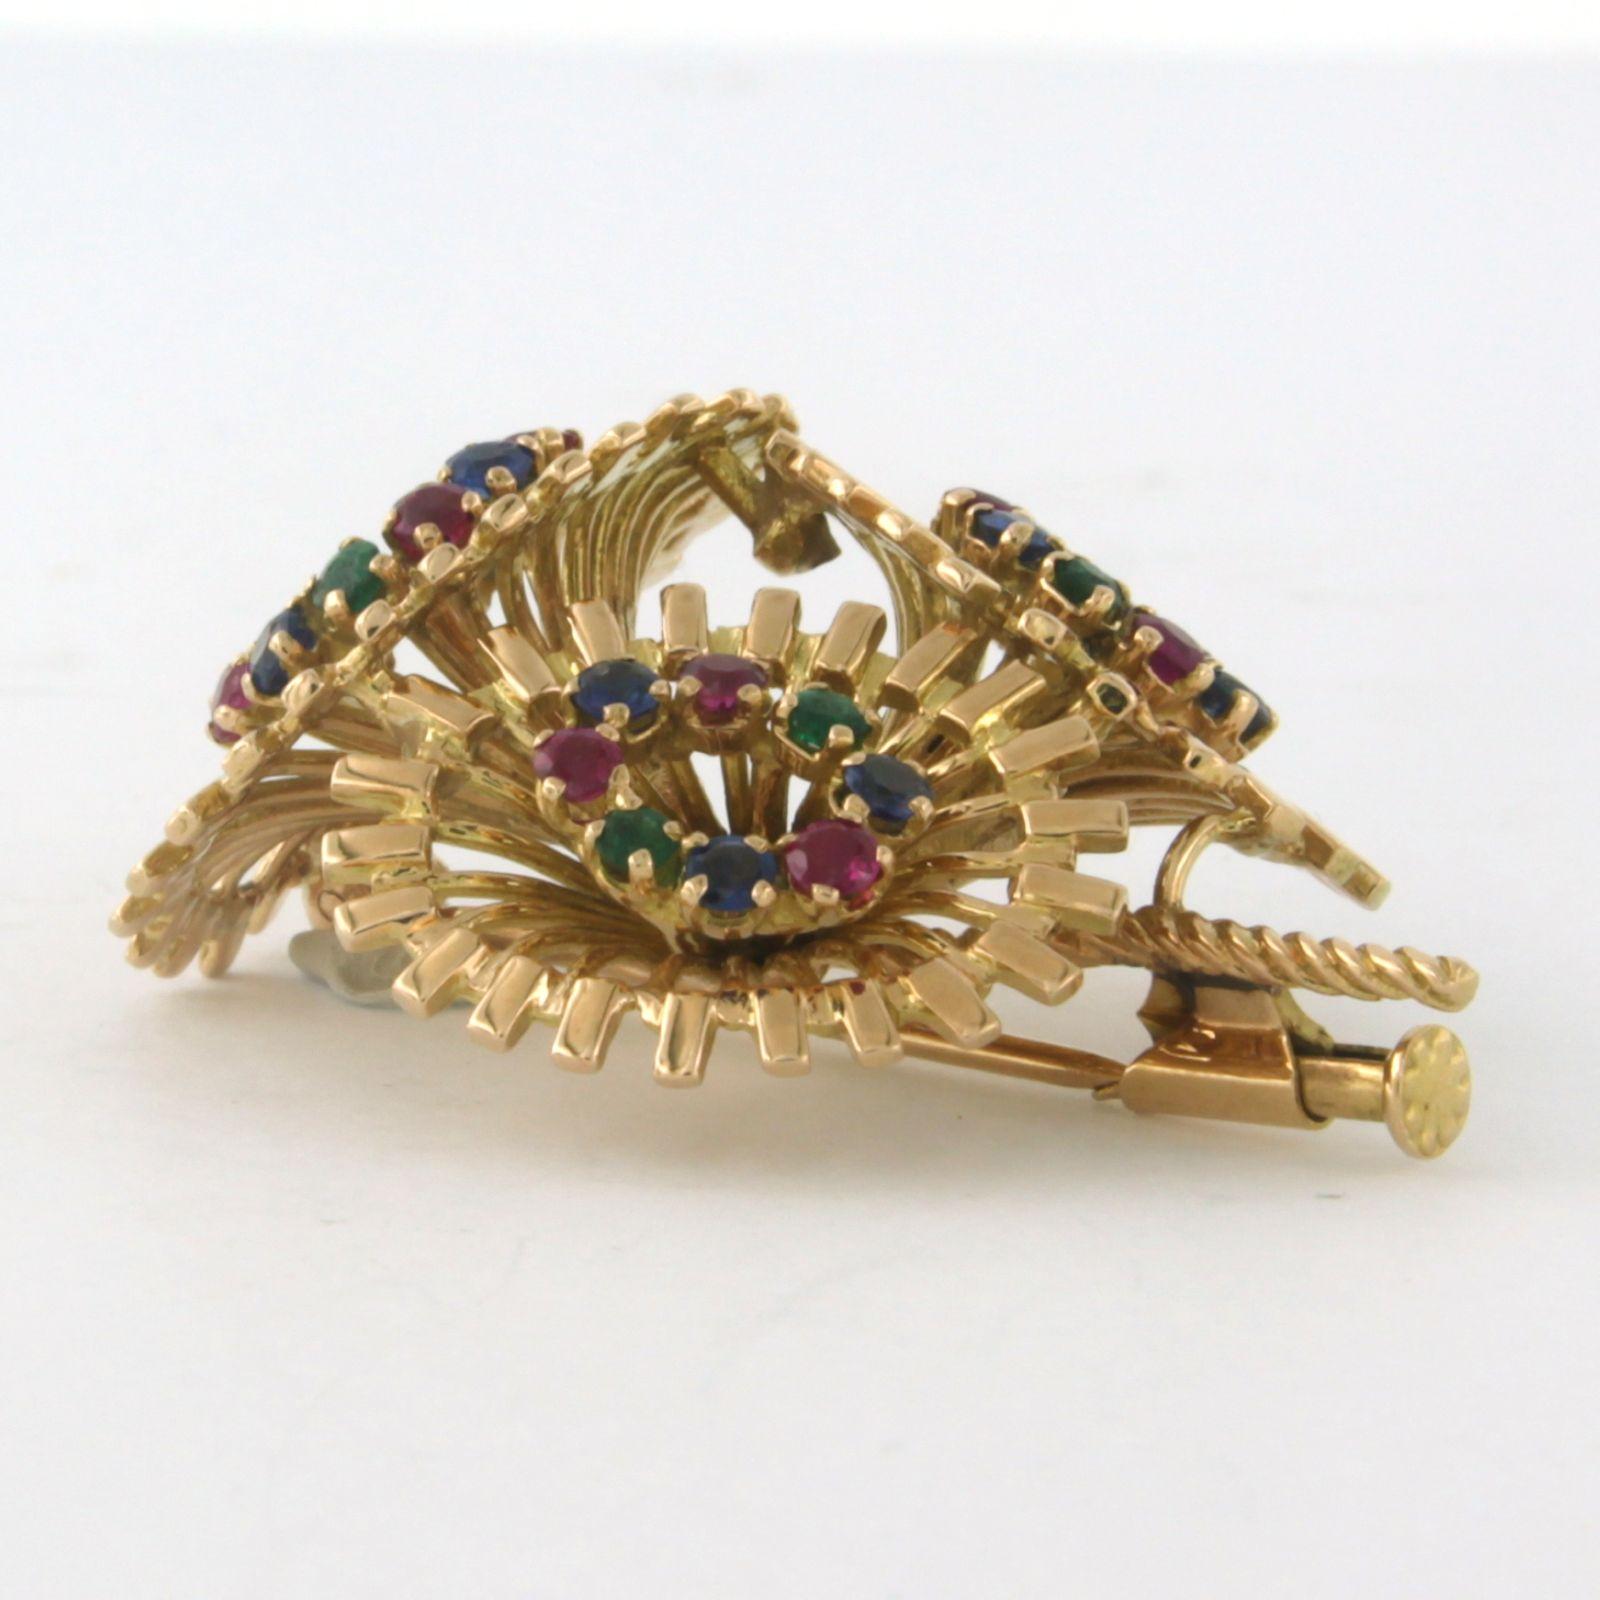 18k yellow gold brooch set with ruby, sapphire and emerald – size 3.6 cm x 2.7 cm

detailed description

the size of the brooch is 3.6 cm long by 2.7 cm wide and 1.5 cm high

weight 12.3 grams

set with

- 8 x 2.0 mm round facet cut oiled emerald,